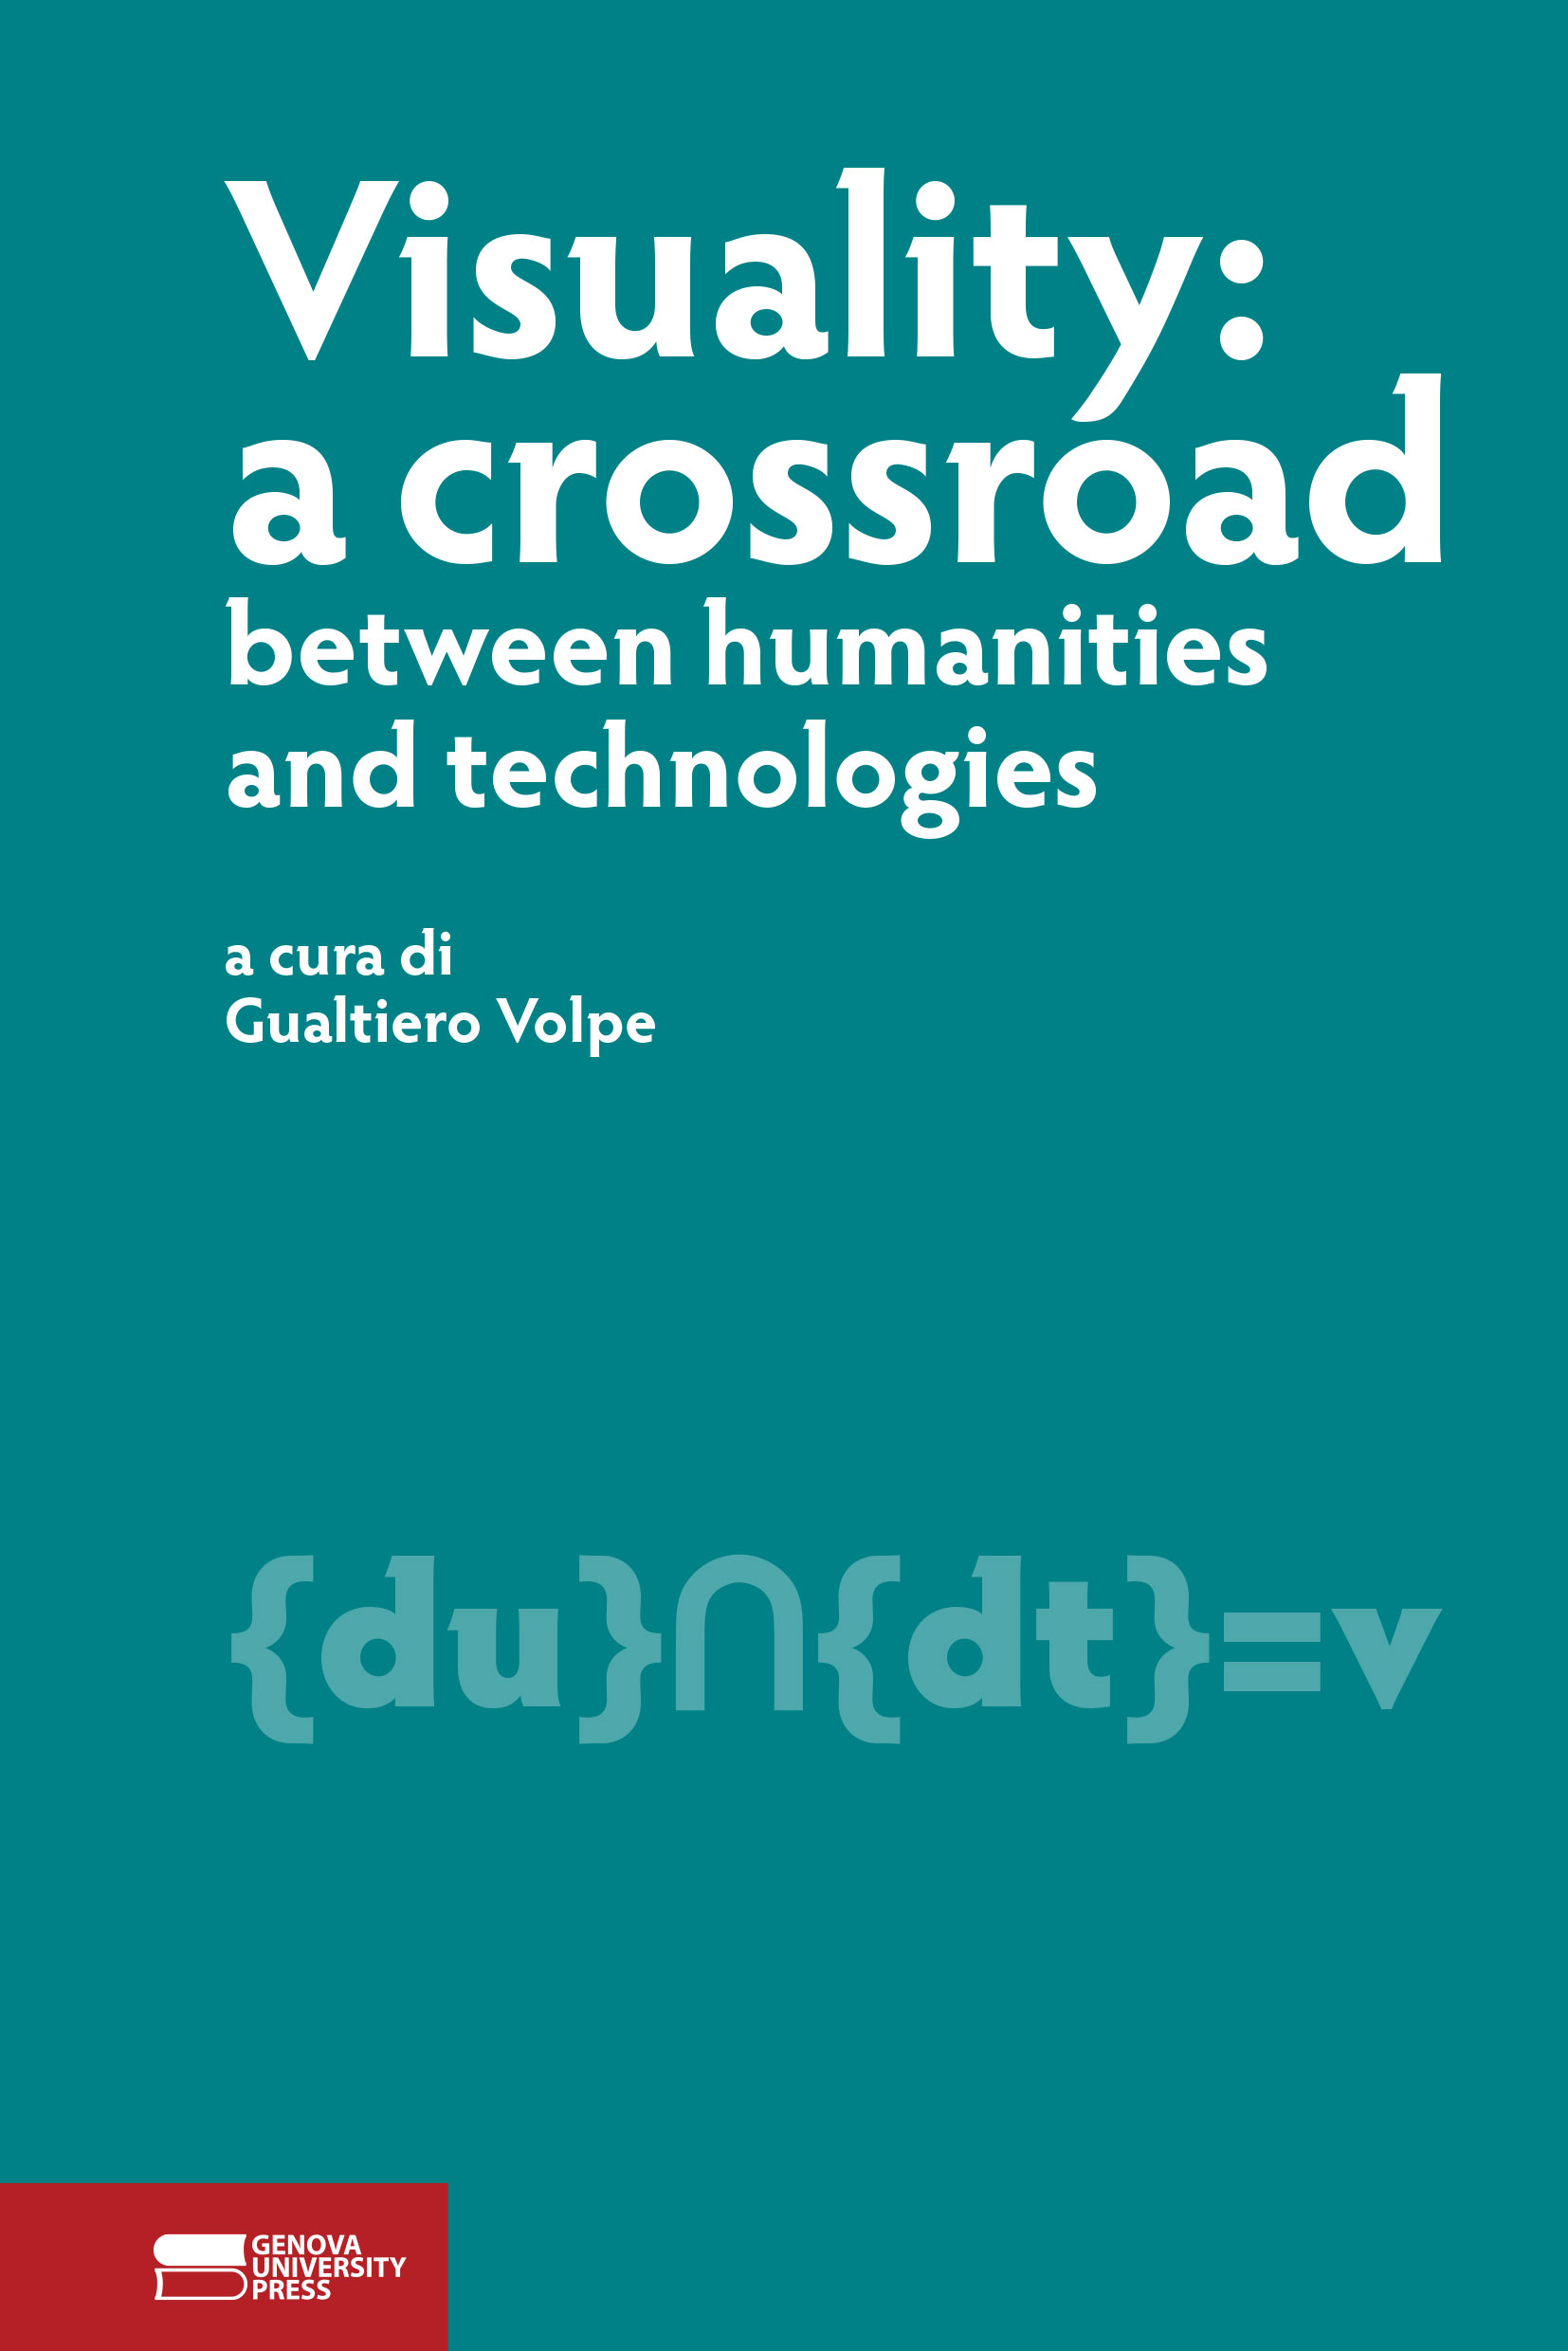 Visuality: a crossroad between humanities and technologies